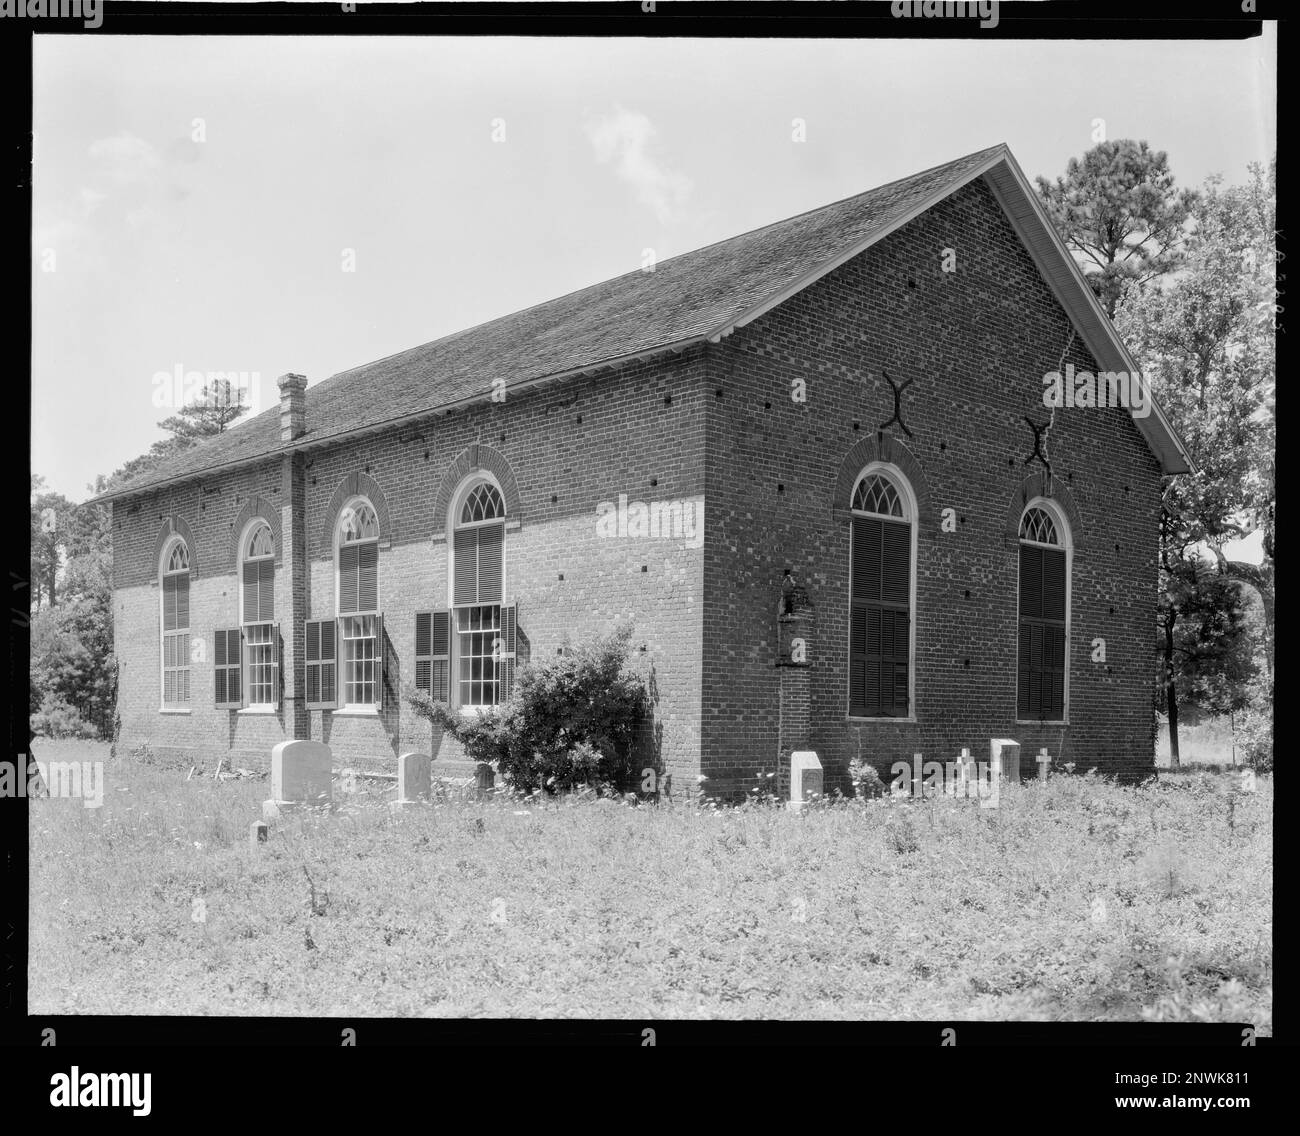 Hungar's Church, Eastville vic., Northampton County, Virginia. Carnegie Survey of the Architecture of the South. United States  Virginia  Northampton County  Eastville vic, Tombs & sepulchral monuments, Fanlights, Churches, Brickwork. Stock Photo